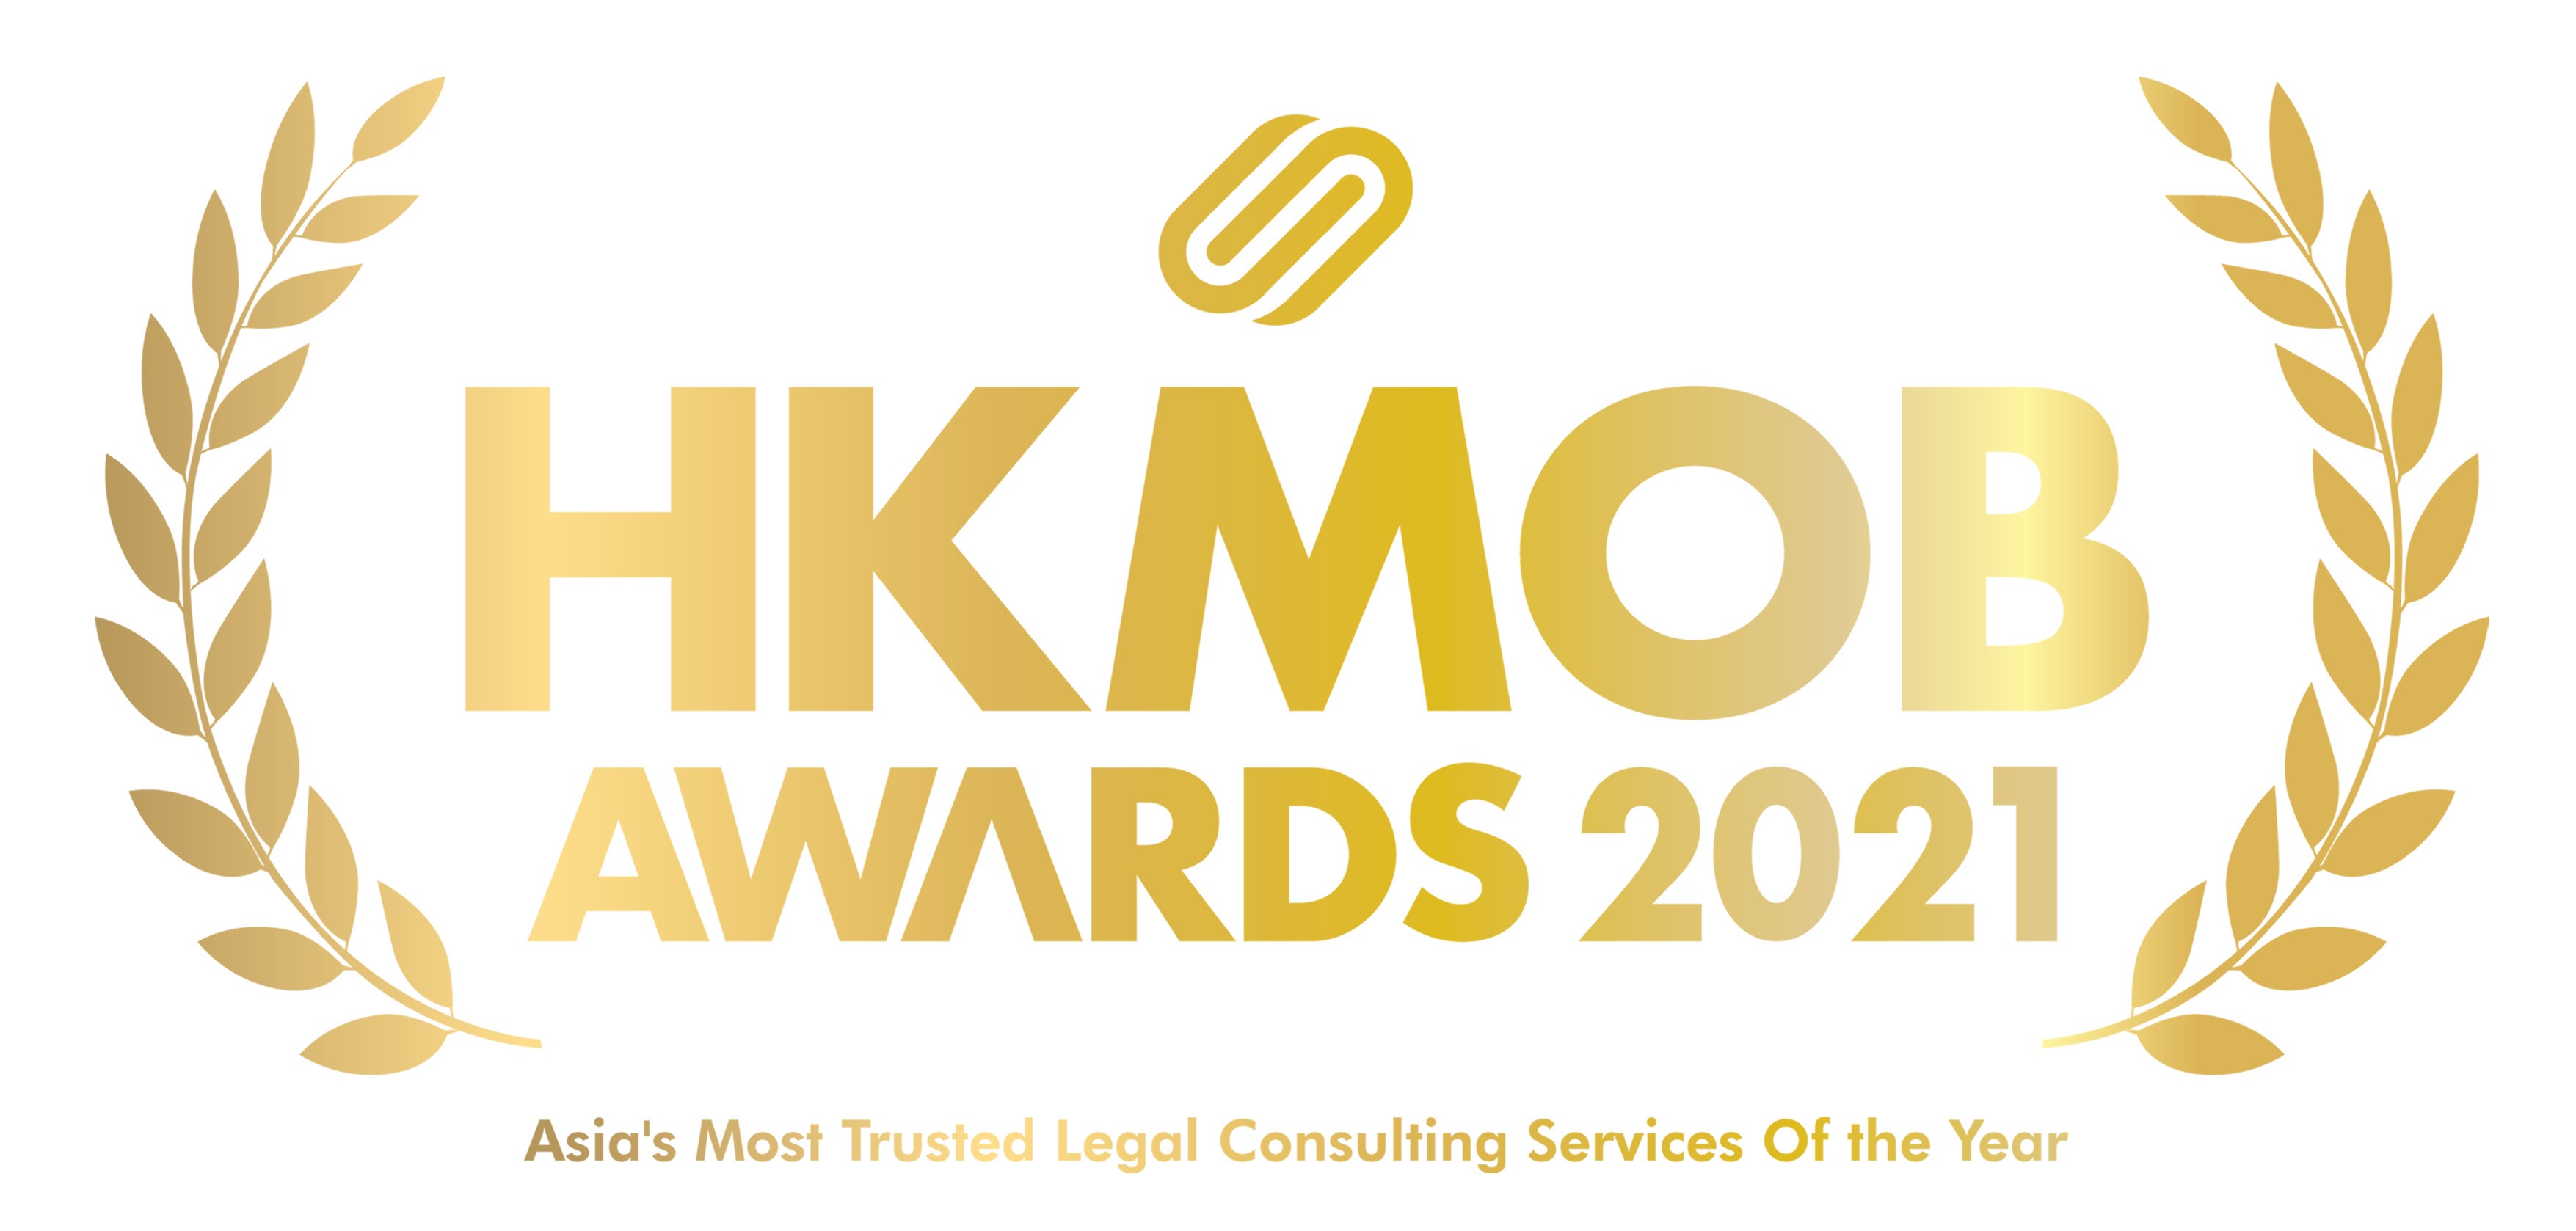 Asia's Most Trusted Legal Consulting Services of the Year in “HKMOB Awards 2021” by CORPHUB